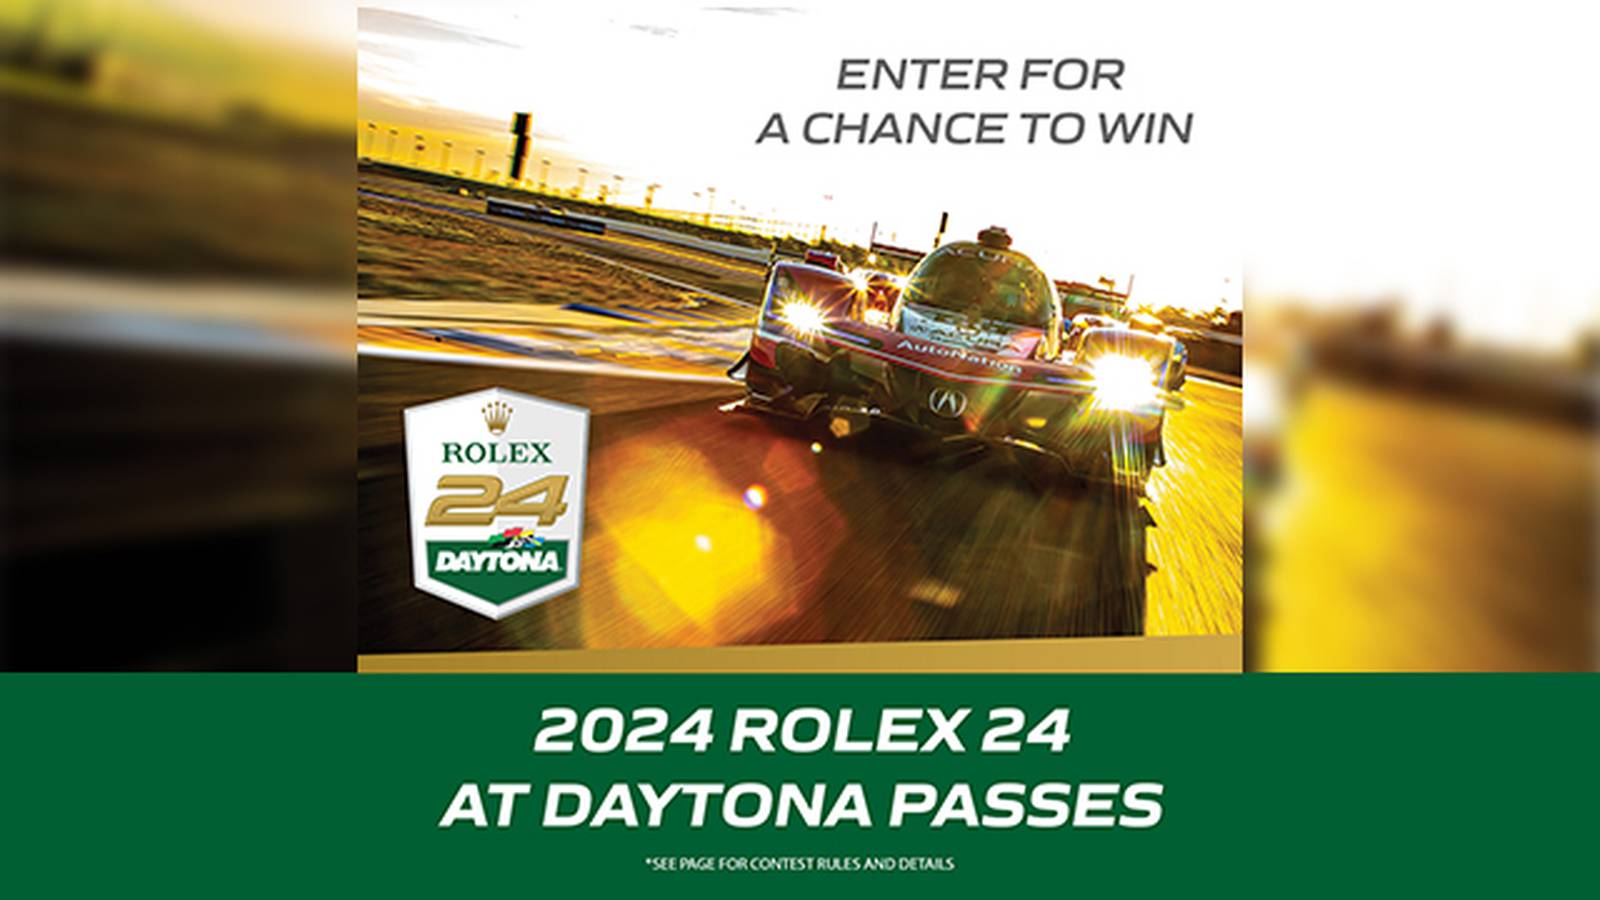 Enter for a chance to win 2024 Rolex 24 at Daytona passes WFTV